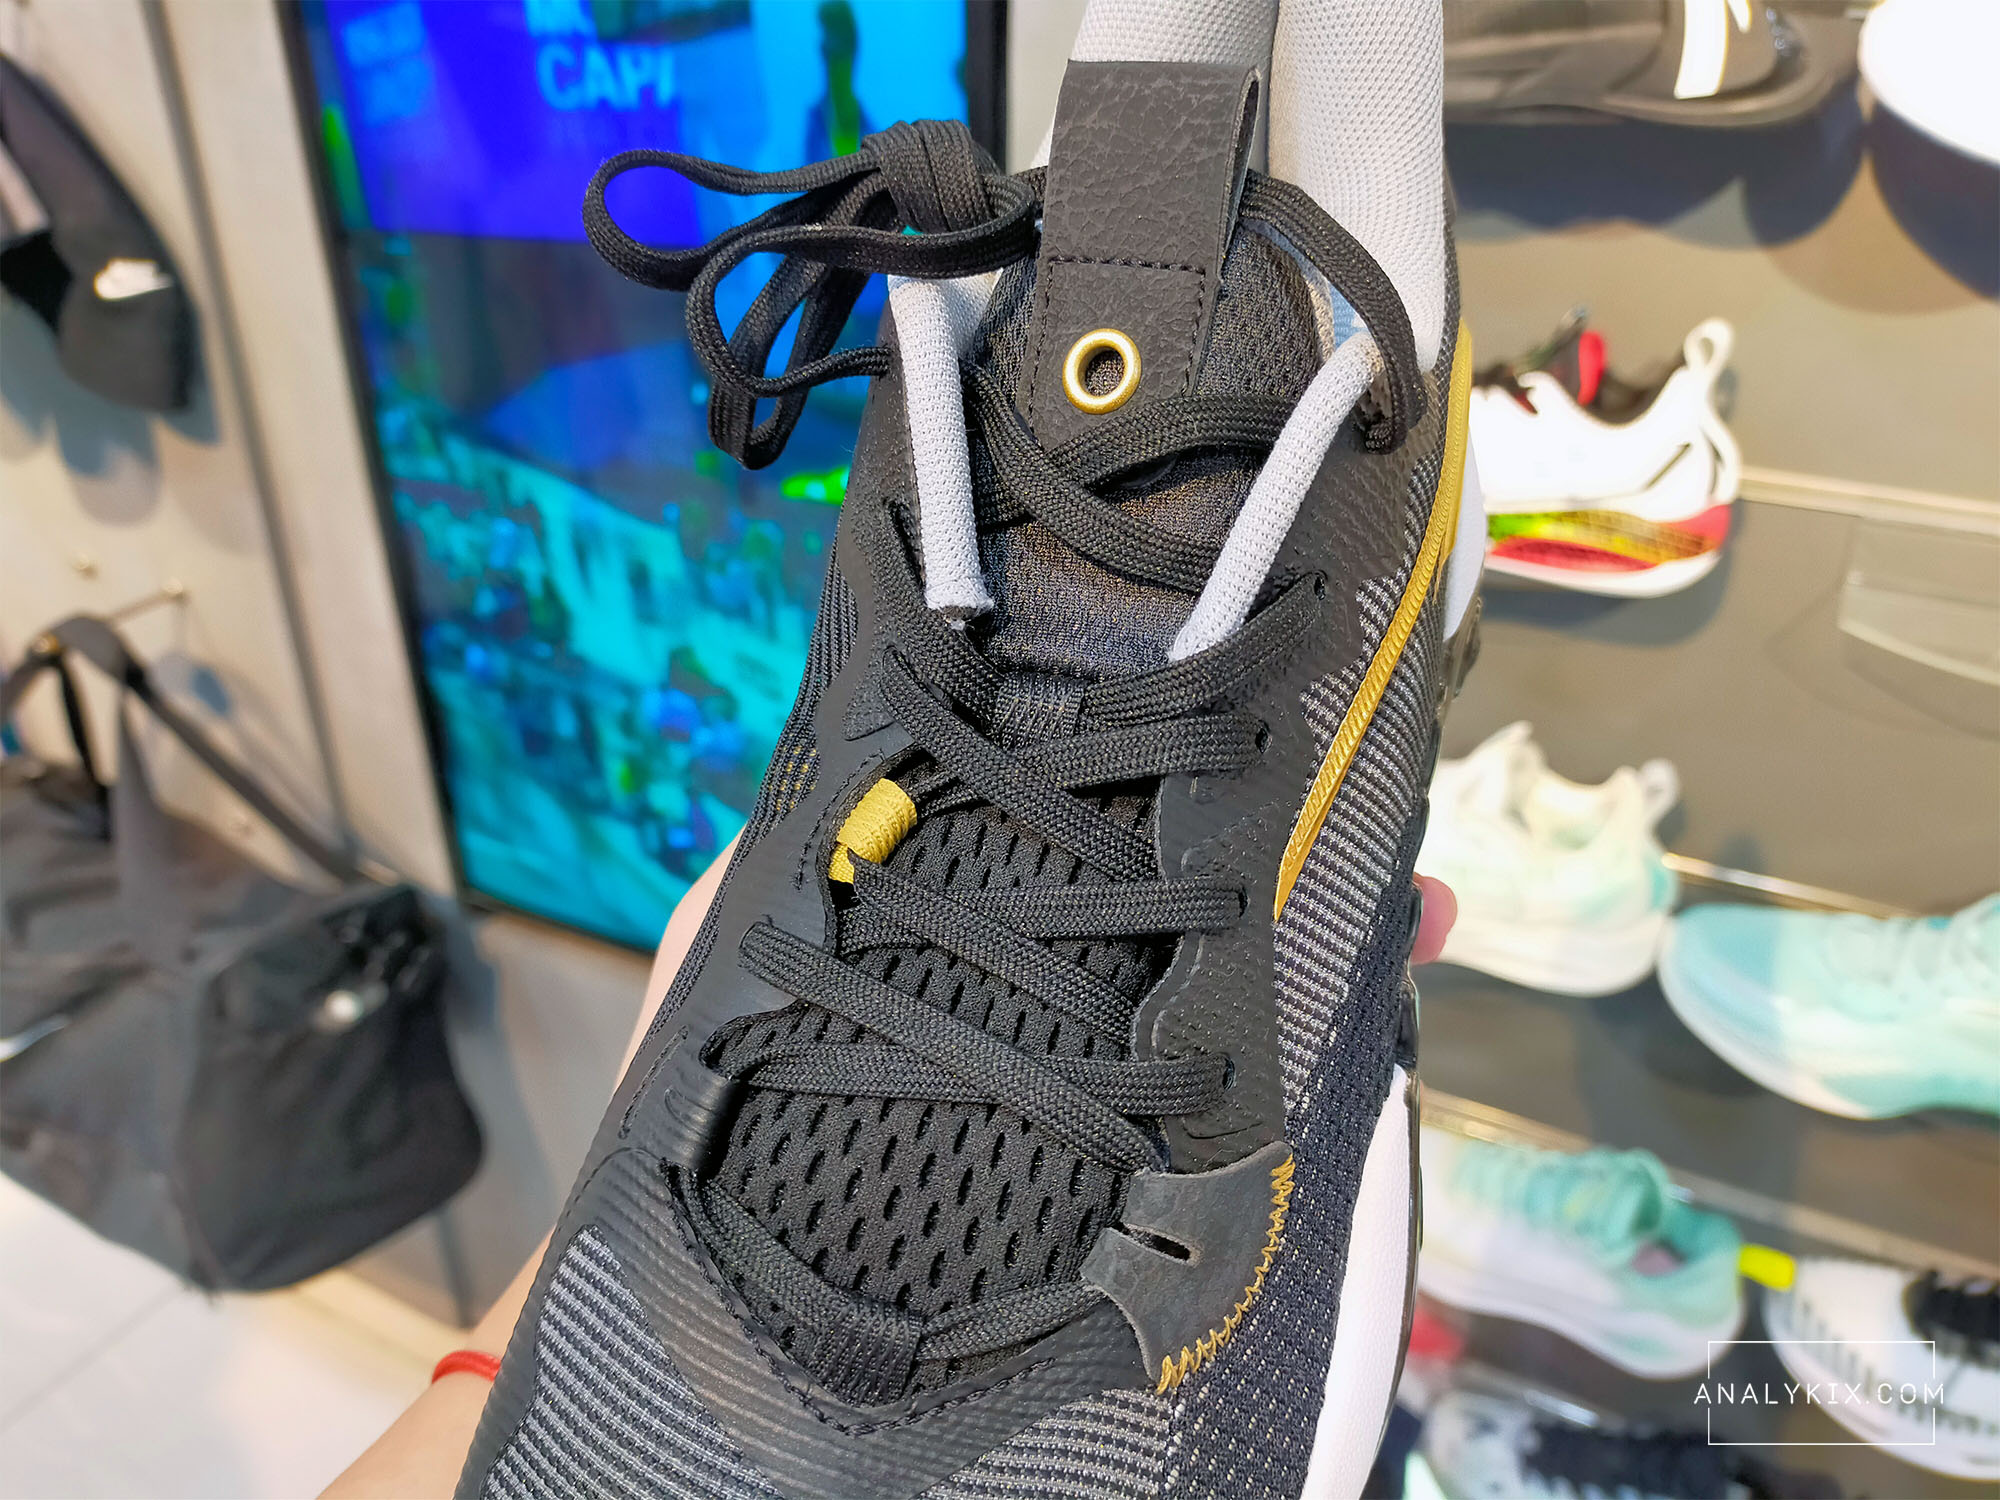 extra support pieces in the lacing system for lockdown